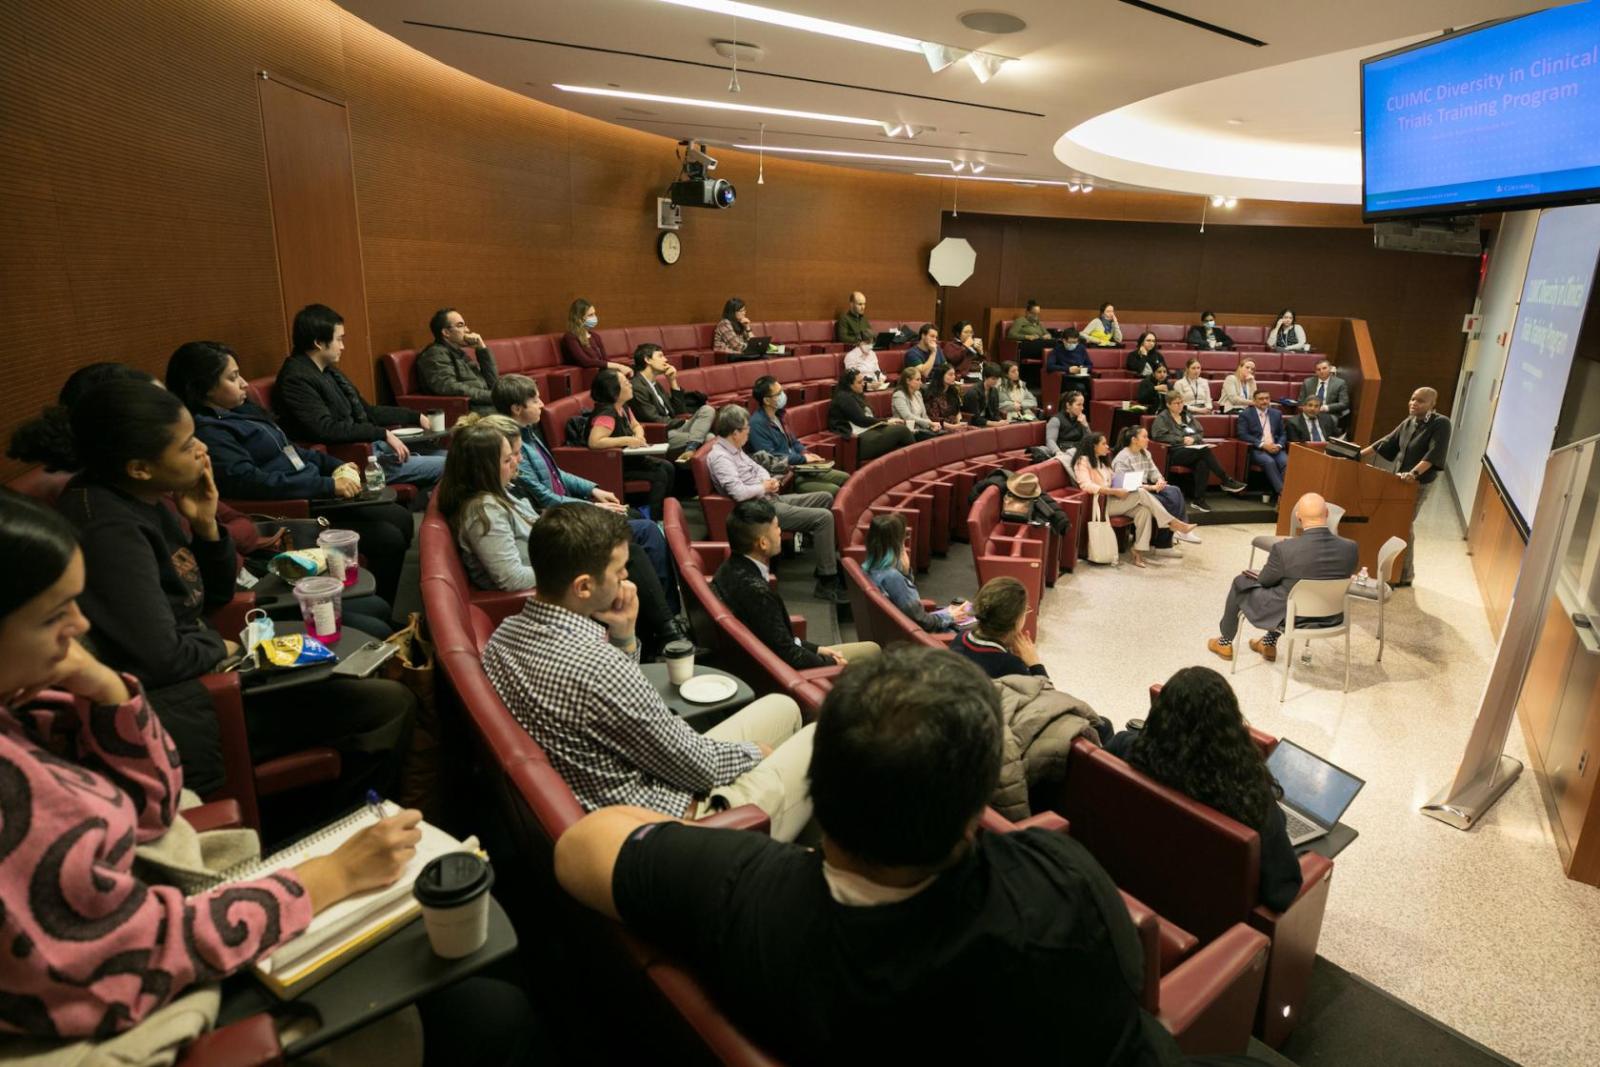 people in an auditorium watching and listening to a speaker at the front of the room